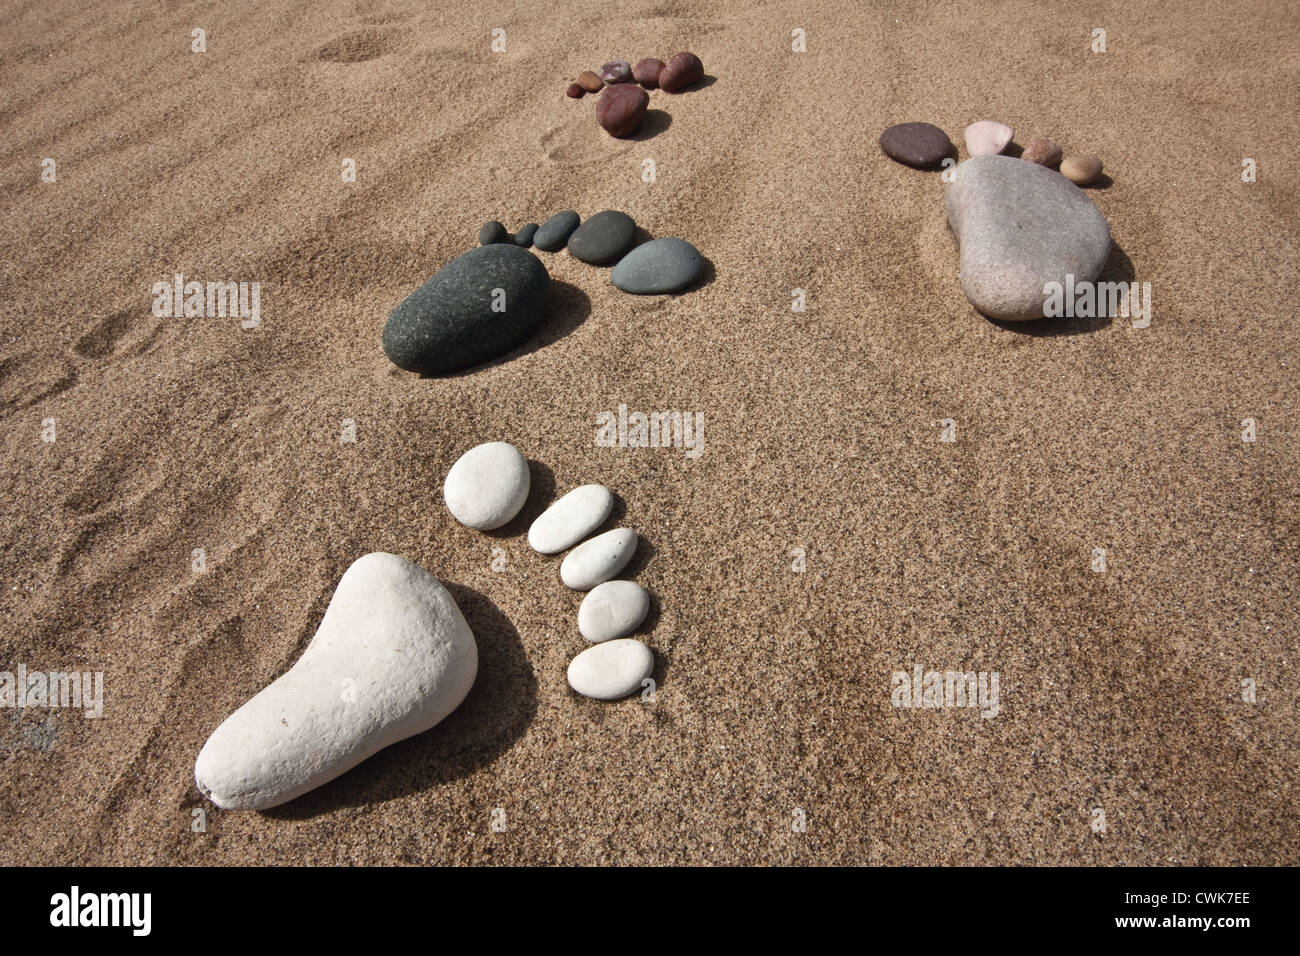 different coloured footsteps made from pebbles take a united walk across a sandy beach Stock Photo